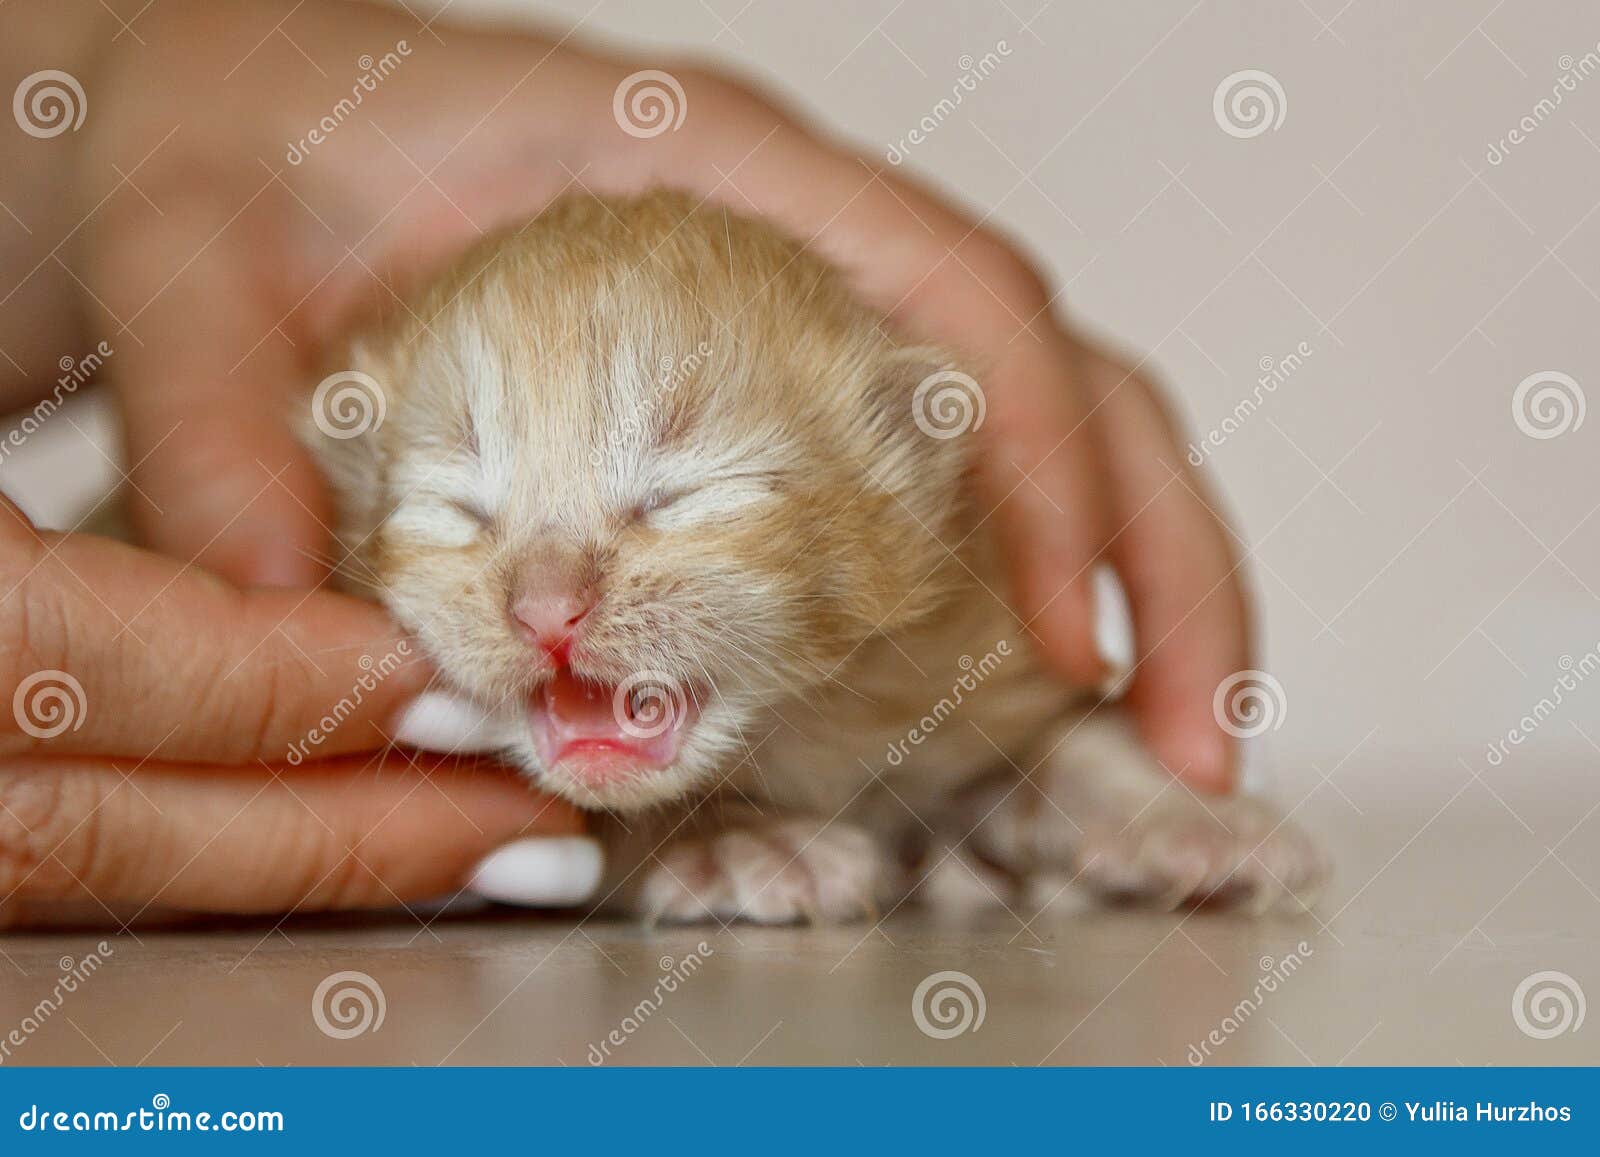 Beige, Small, Fluffy Cute Kitten in Hands Closeup. One Week Old Newborn Cat  with Eyes Closed, Baby Animals and Adorable Cat Stock Photo - Image of  beauty, birth: 166330220